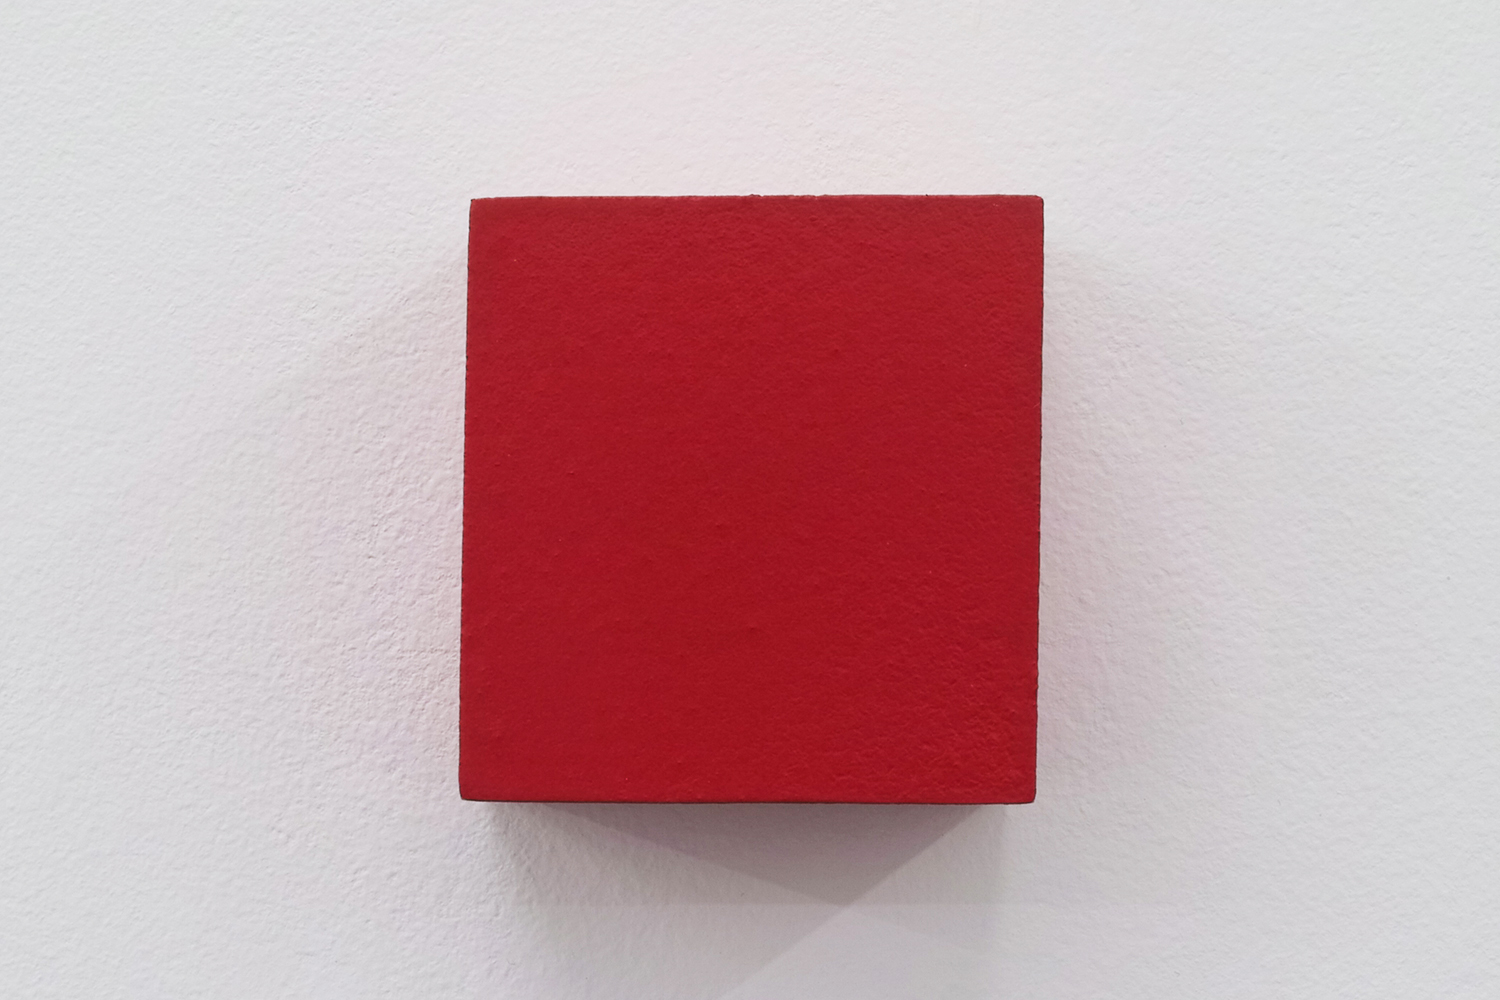 Text No. 544｜pigment, acrylic on wood｜52 x 50 x 37 mm｜2005<br>¥50,000 - 150,000